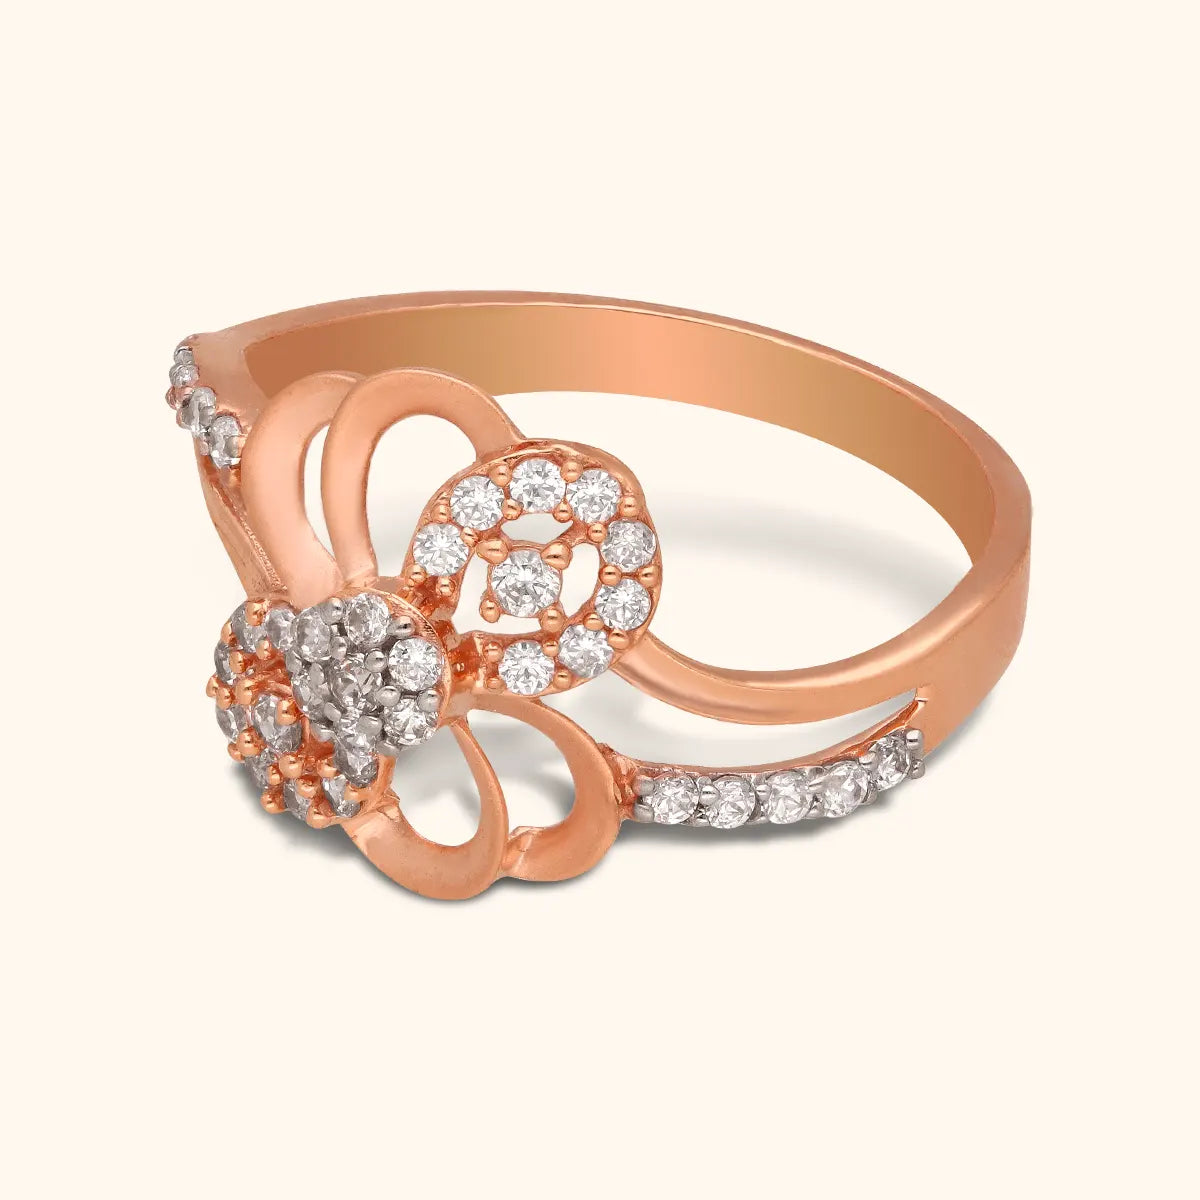 Buy quality Delicately Designed Flower Ring with Fancy Shaped Design for  Party Wear in 18k Rose Gold - 0.83 carats - 6.100 grams - 0LR28 in Pune